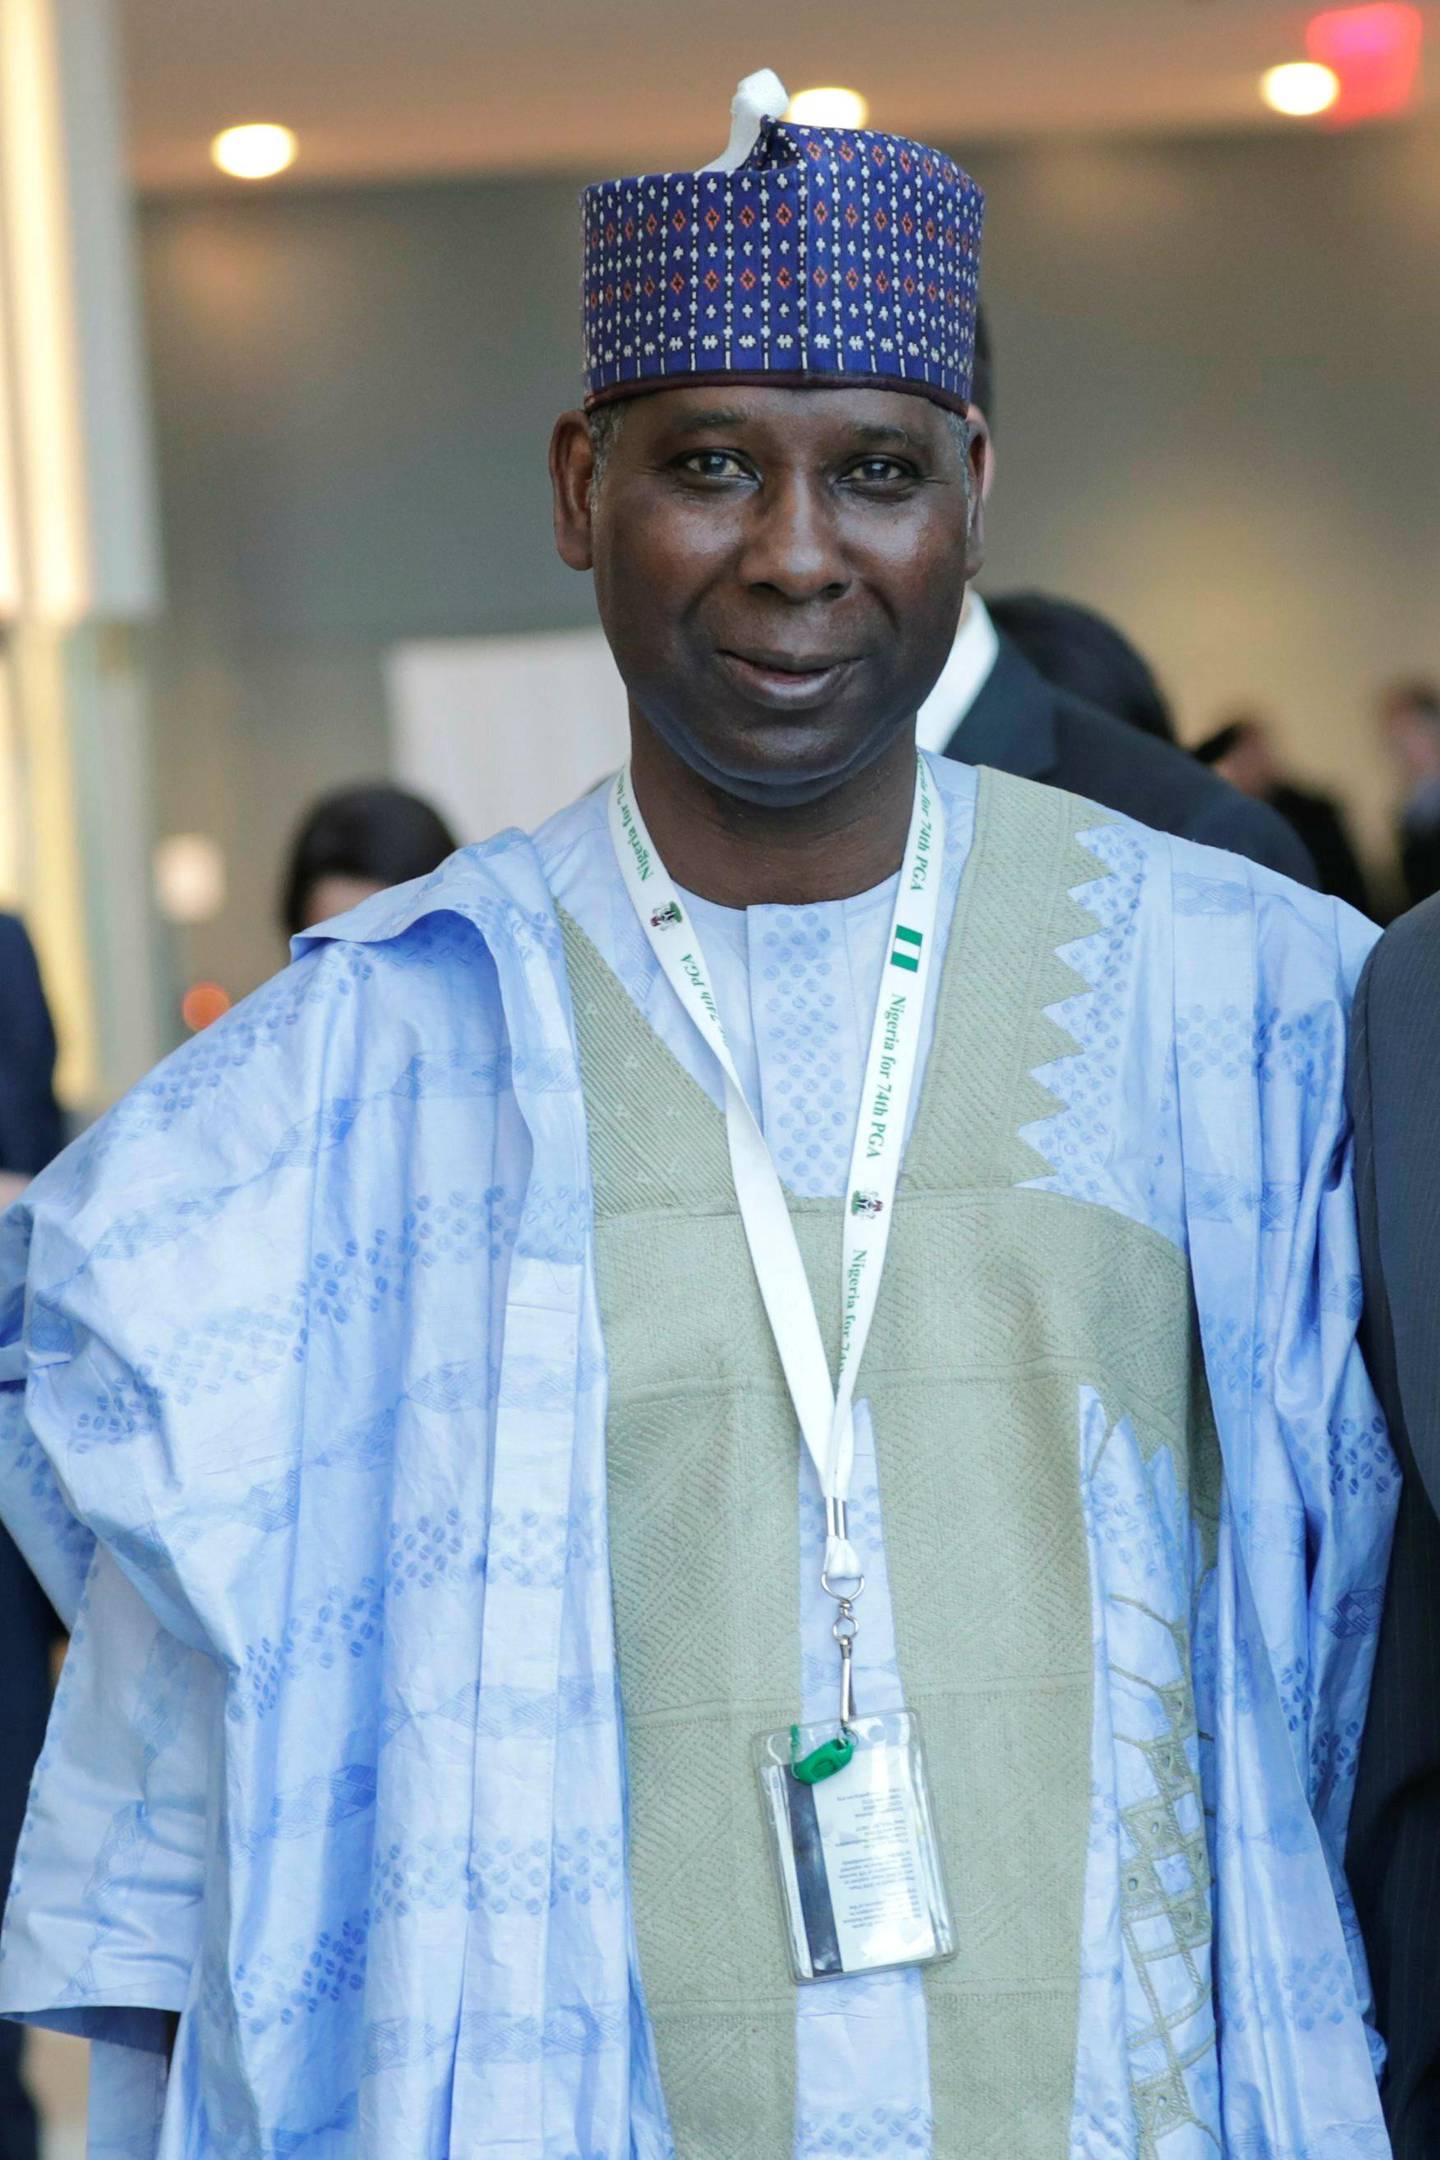 United Nations, New York, USA, June 04, 2019 - Tijjani Muhammad-Bande, Permanent Representative of Nigeria to the United Nations and President elected of the General Assembly during the opening of the Living in the Age of Plastic a National Geographic exhibit at the UN Headquarters in New York. Photo by: Luiz Rampelotto/EuropaNewswire/picture-alliance/dpa/AP Images